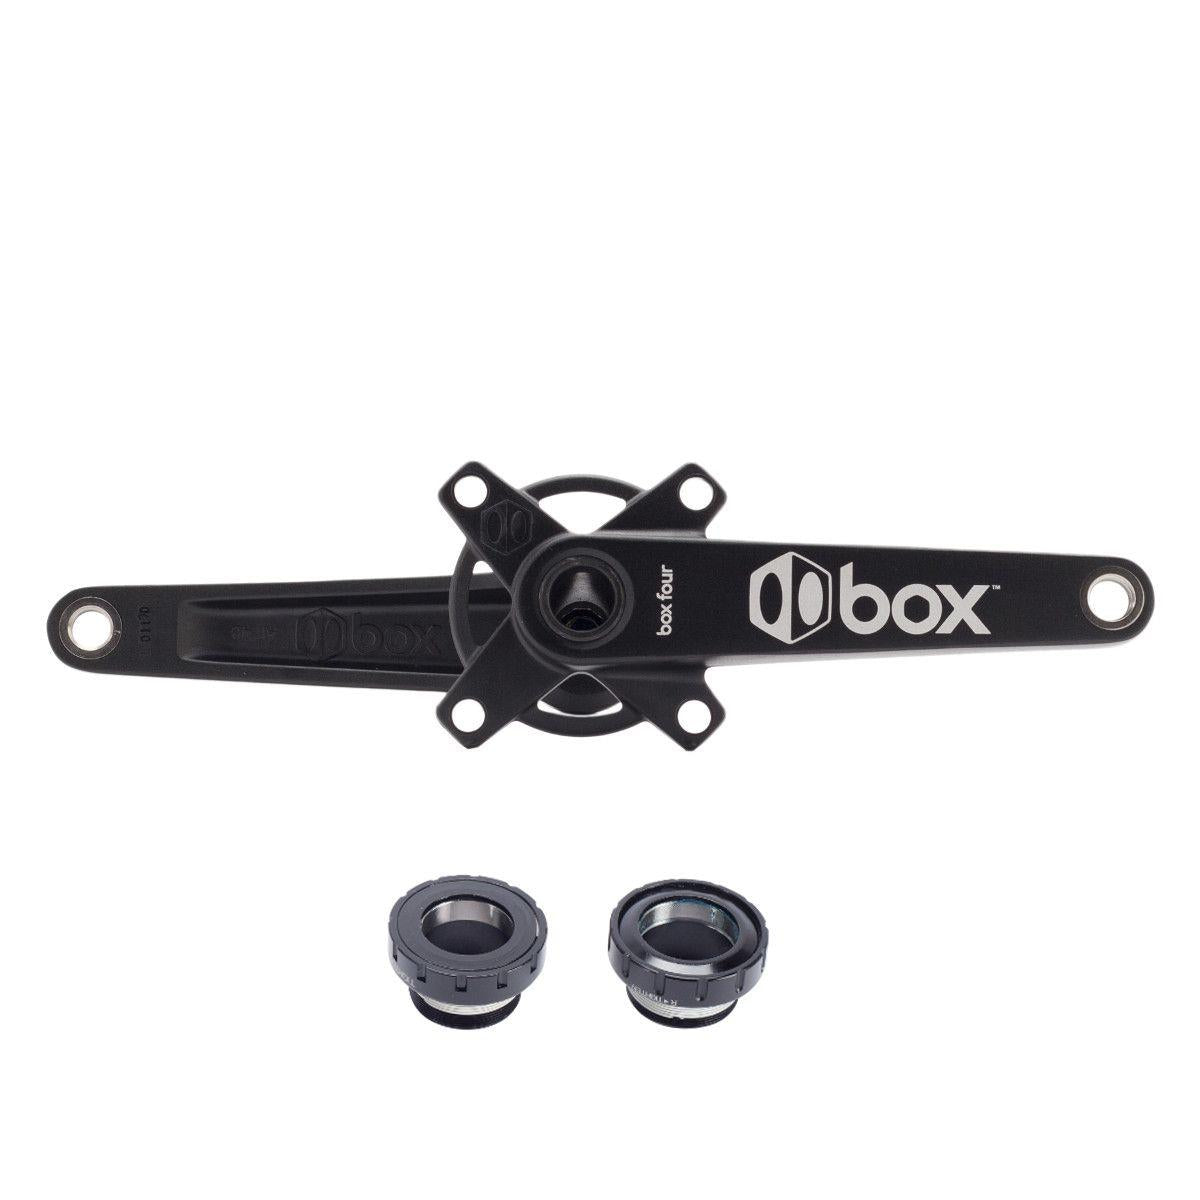 Box Four Forged 2pc Race Cranks 160mm